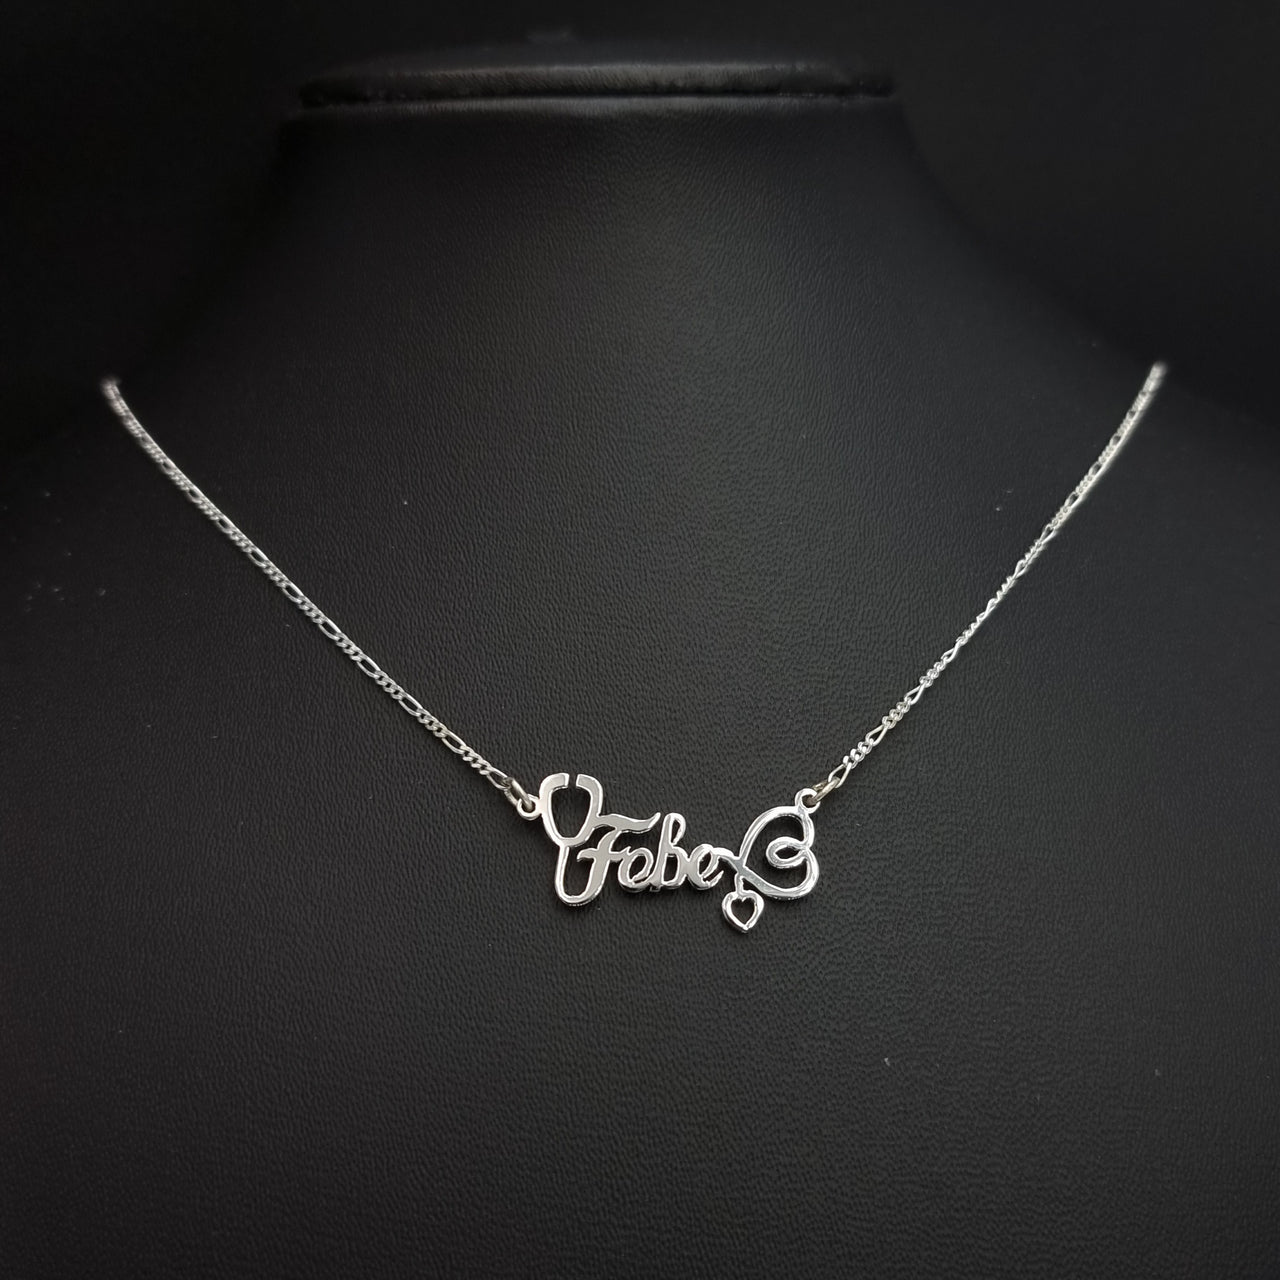 Personalized name necklace for medical staff